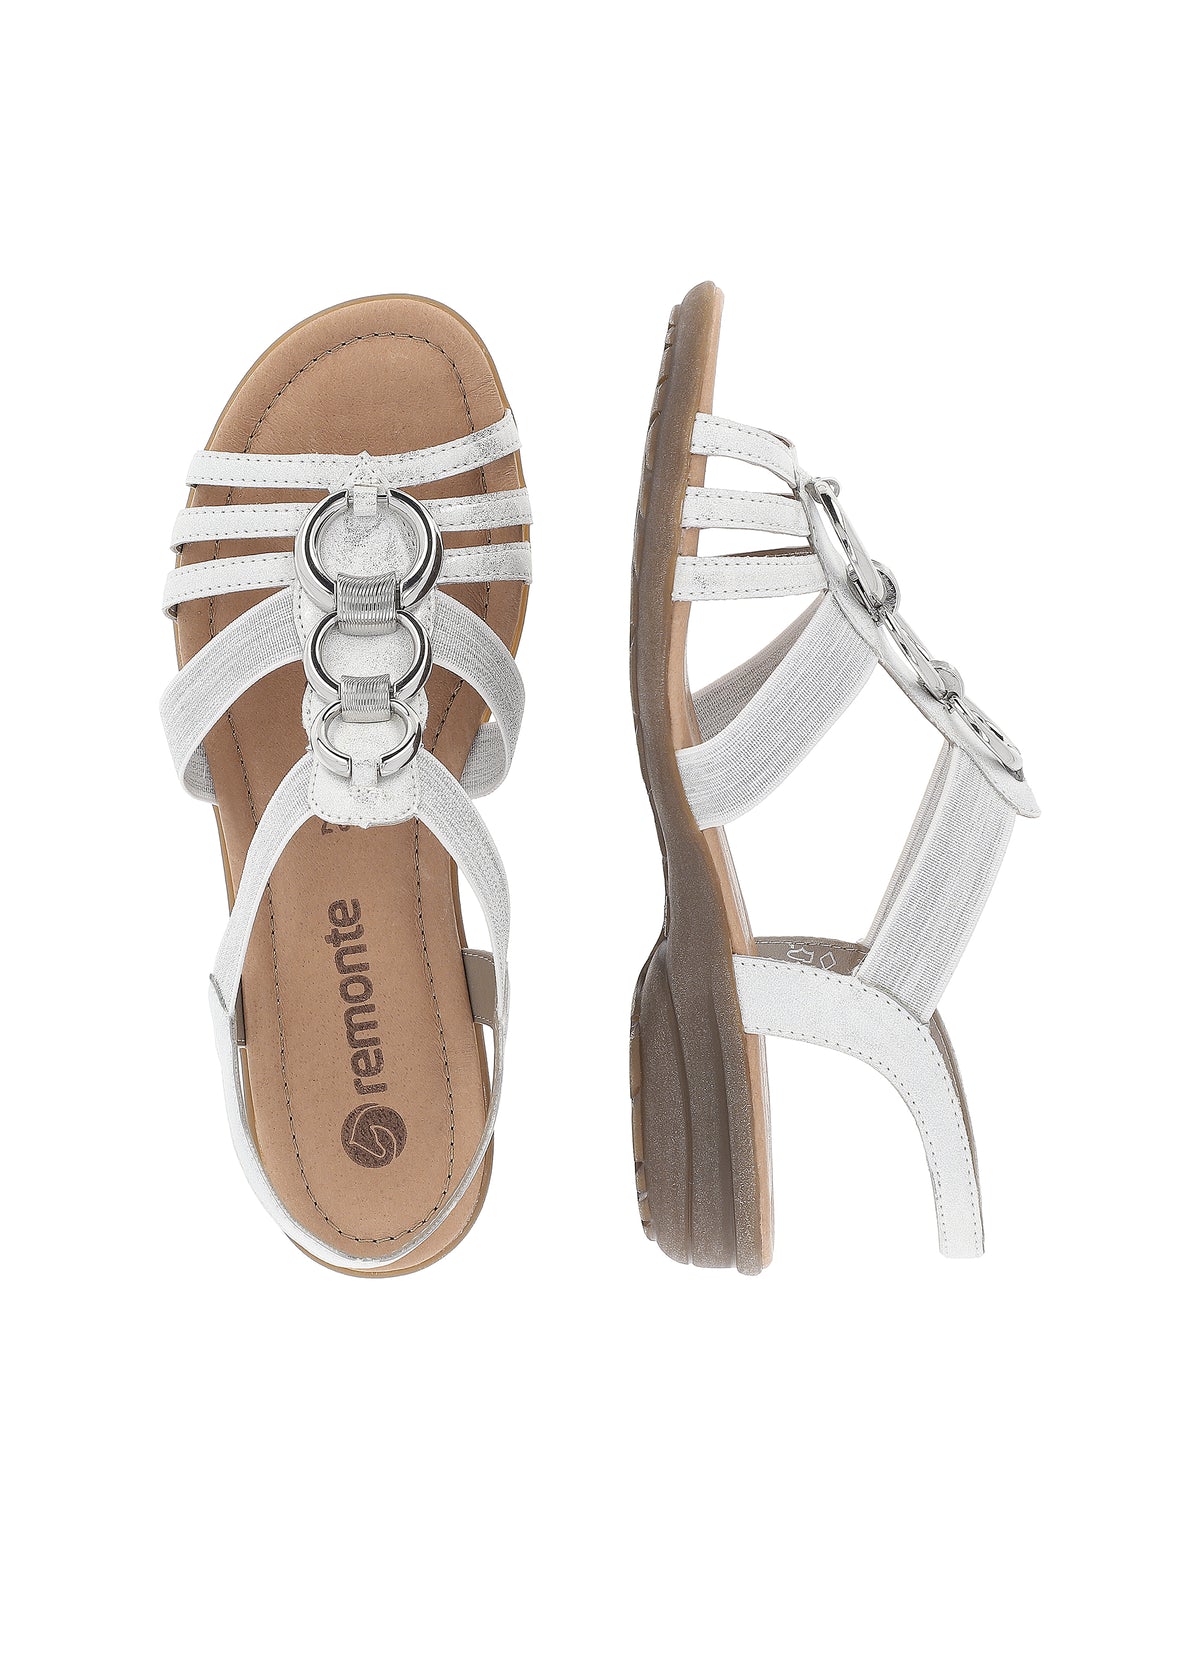 Low thong sandals - white, silver decorations